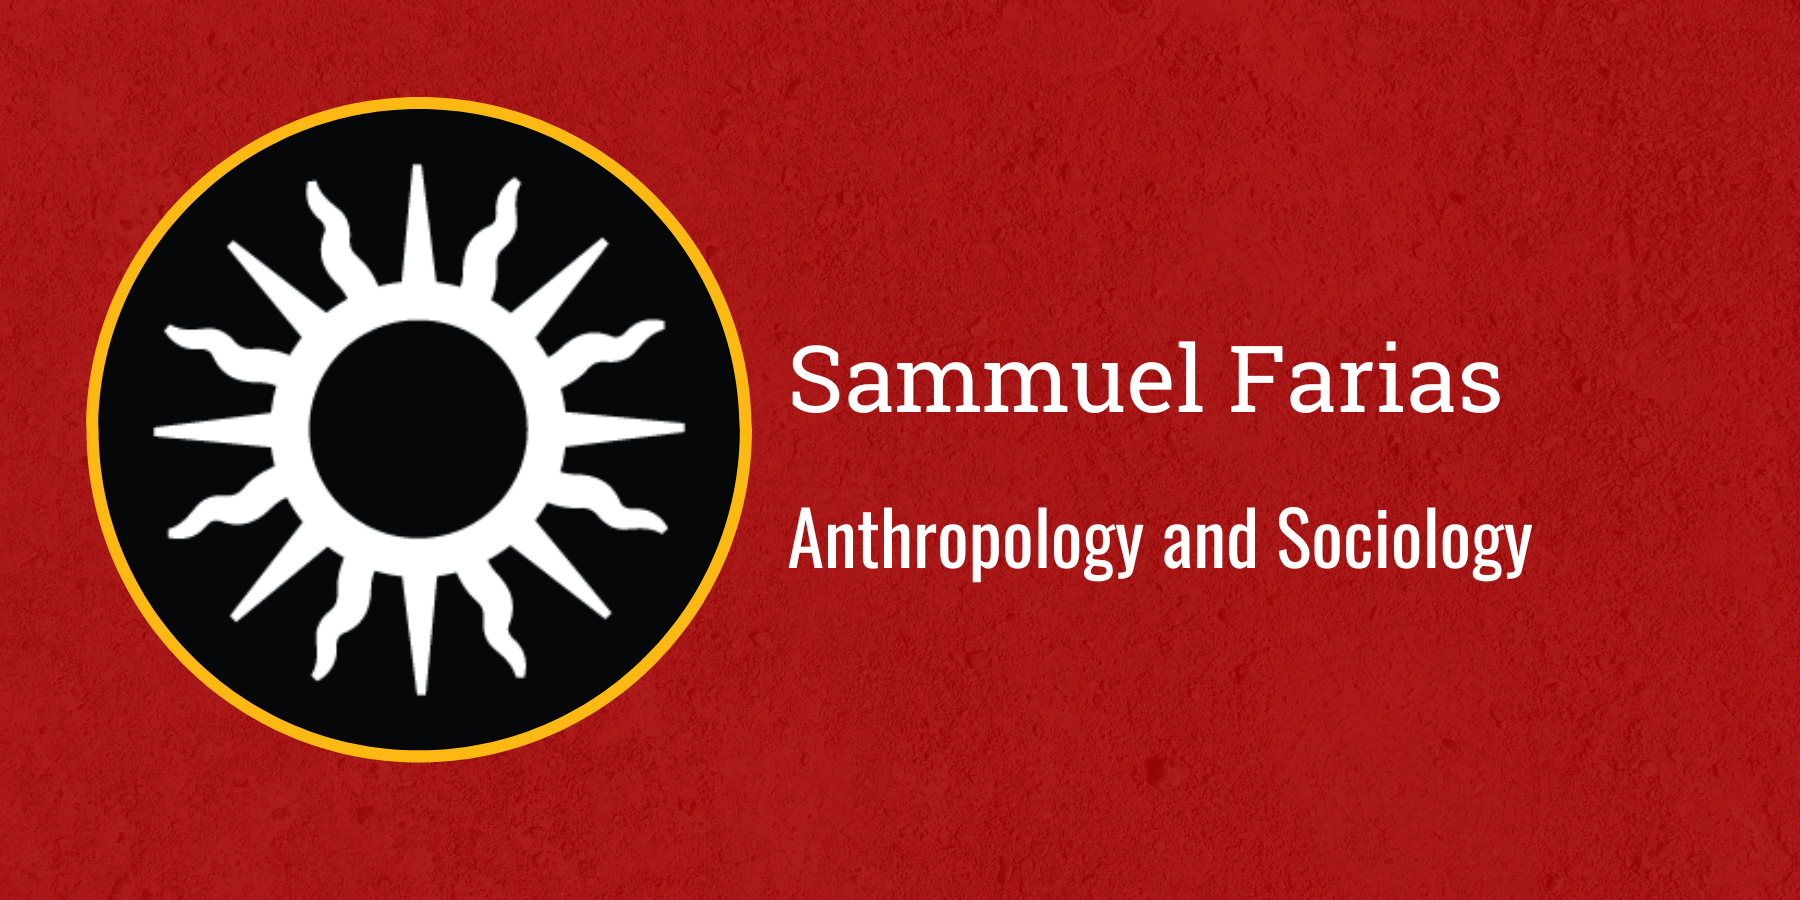 Sammuel Farias
Anthropology and Sociology